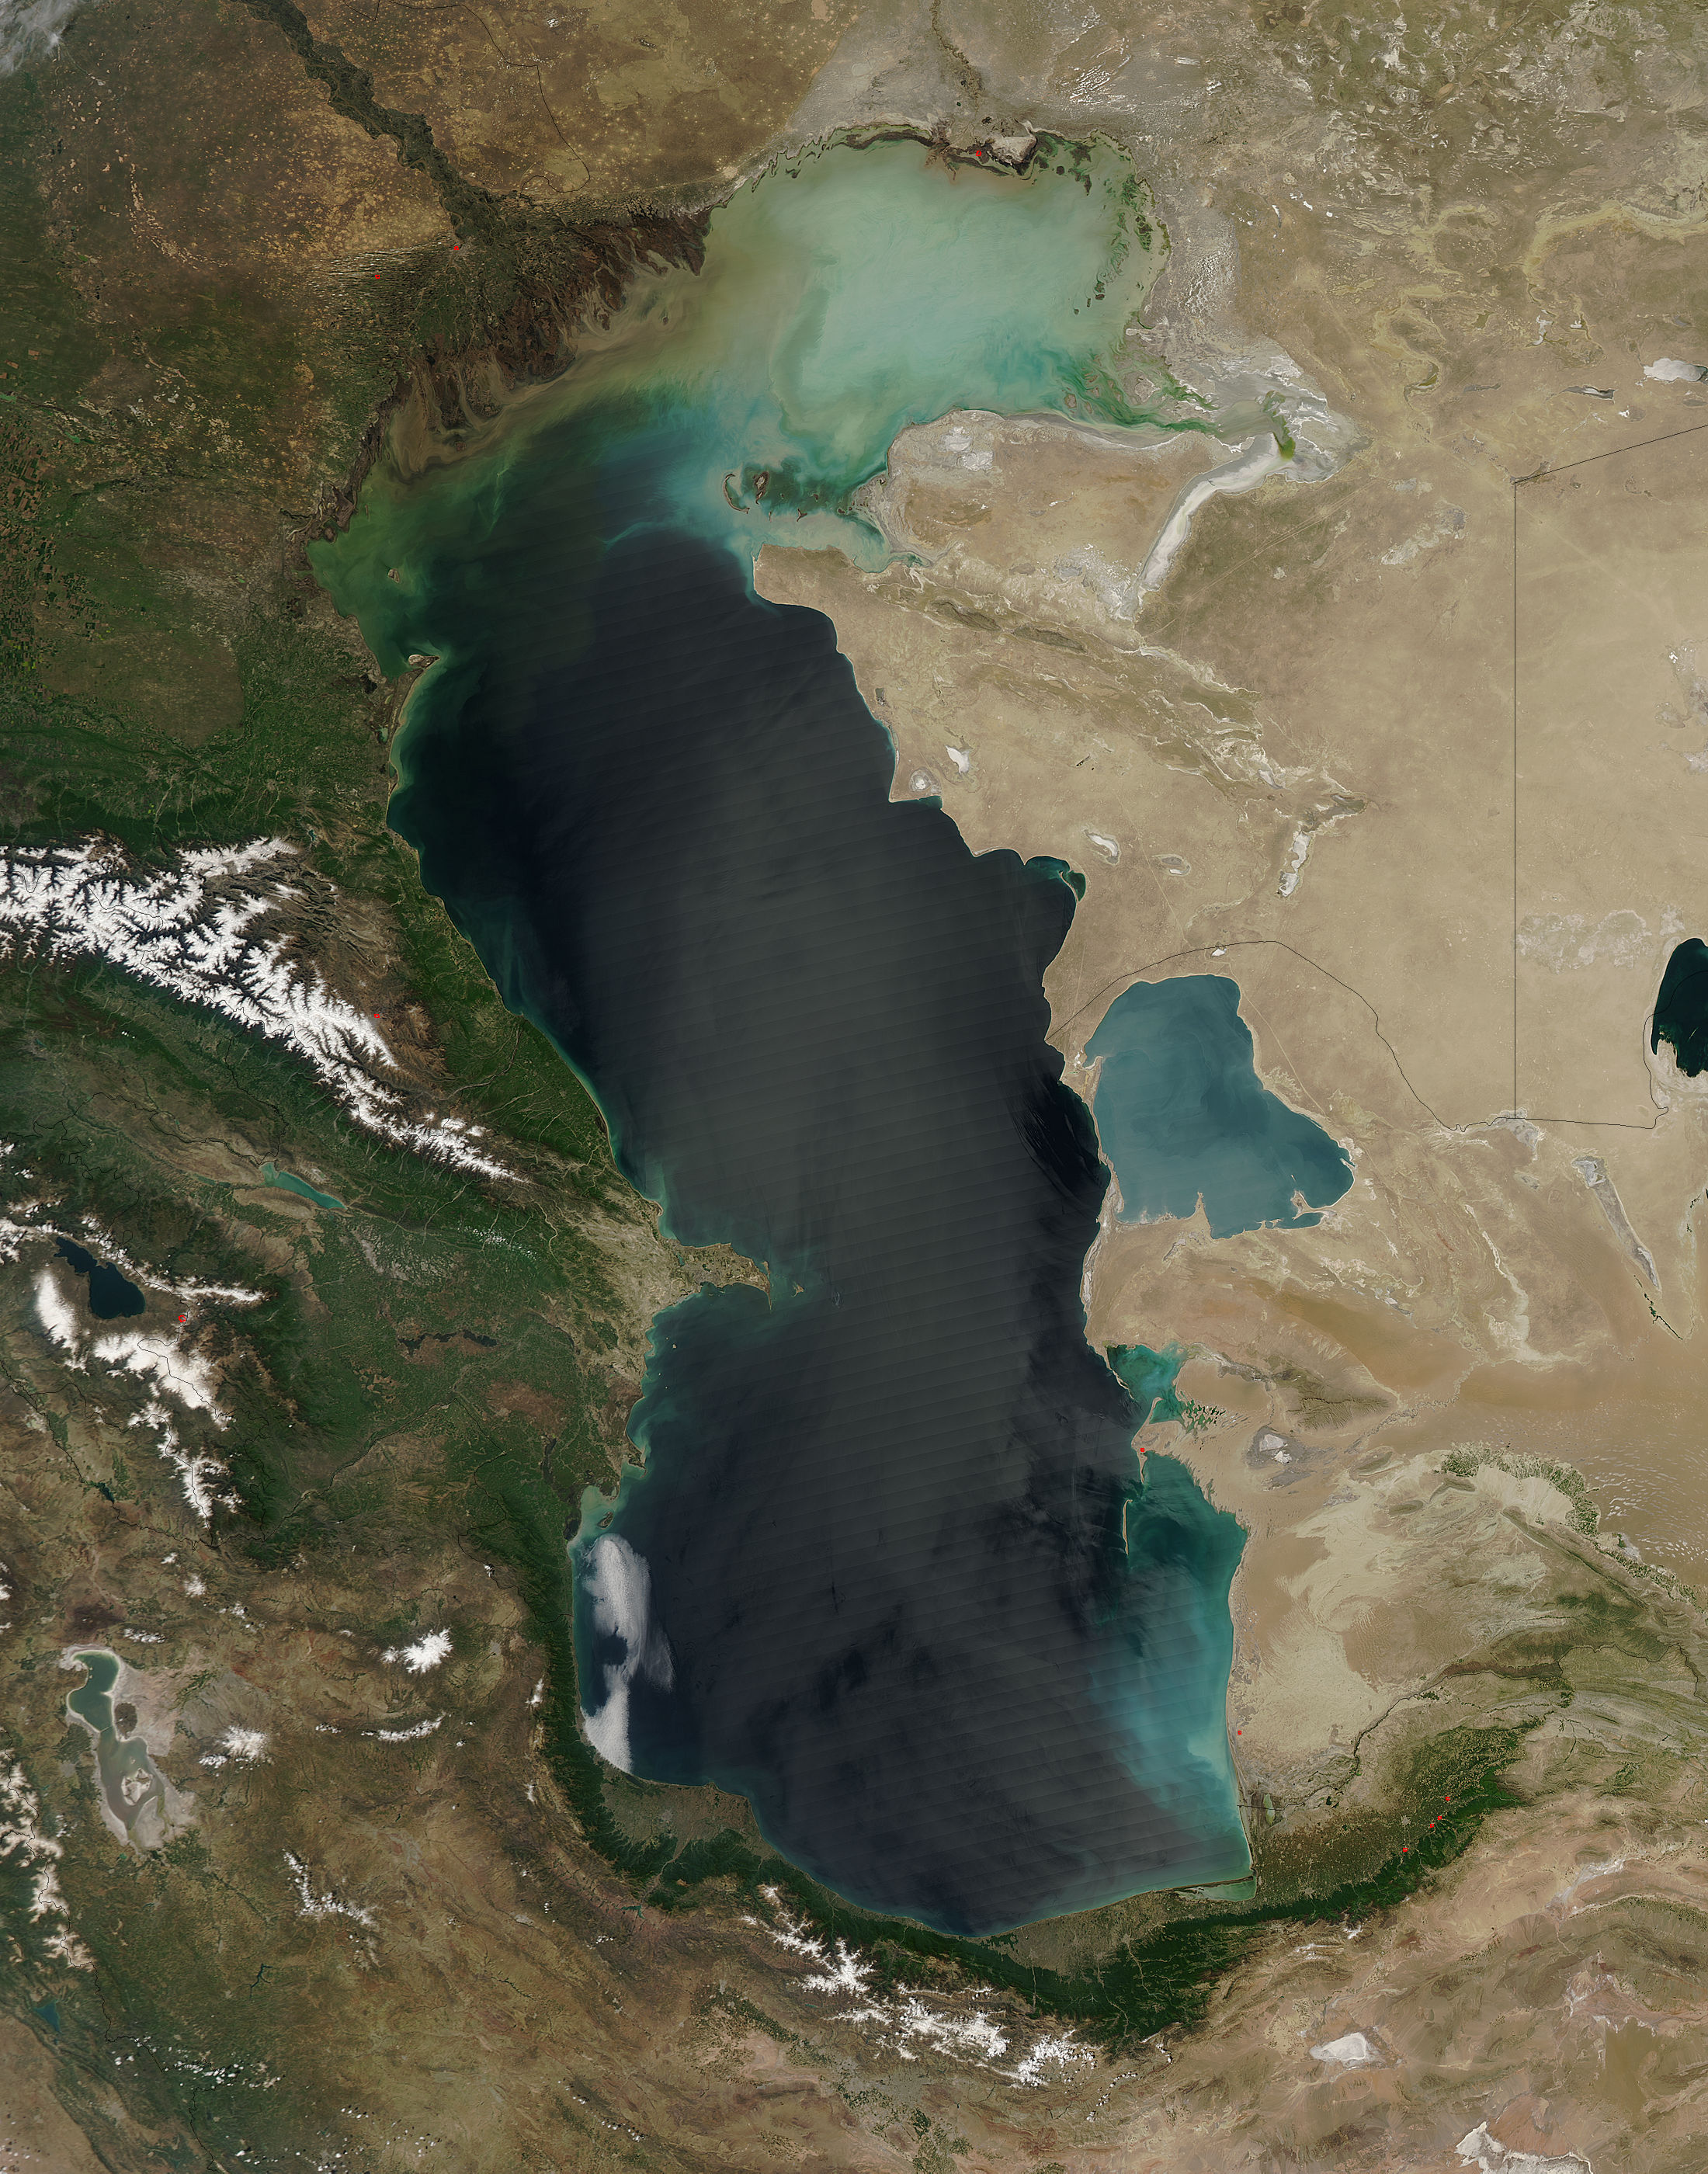 Caspian Sea - related image preview